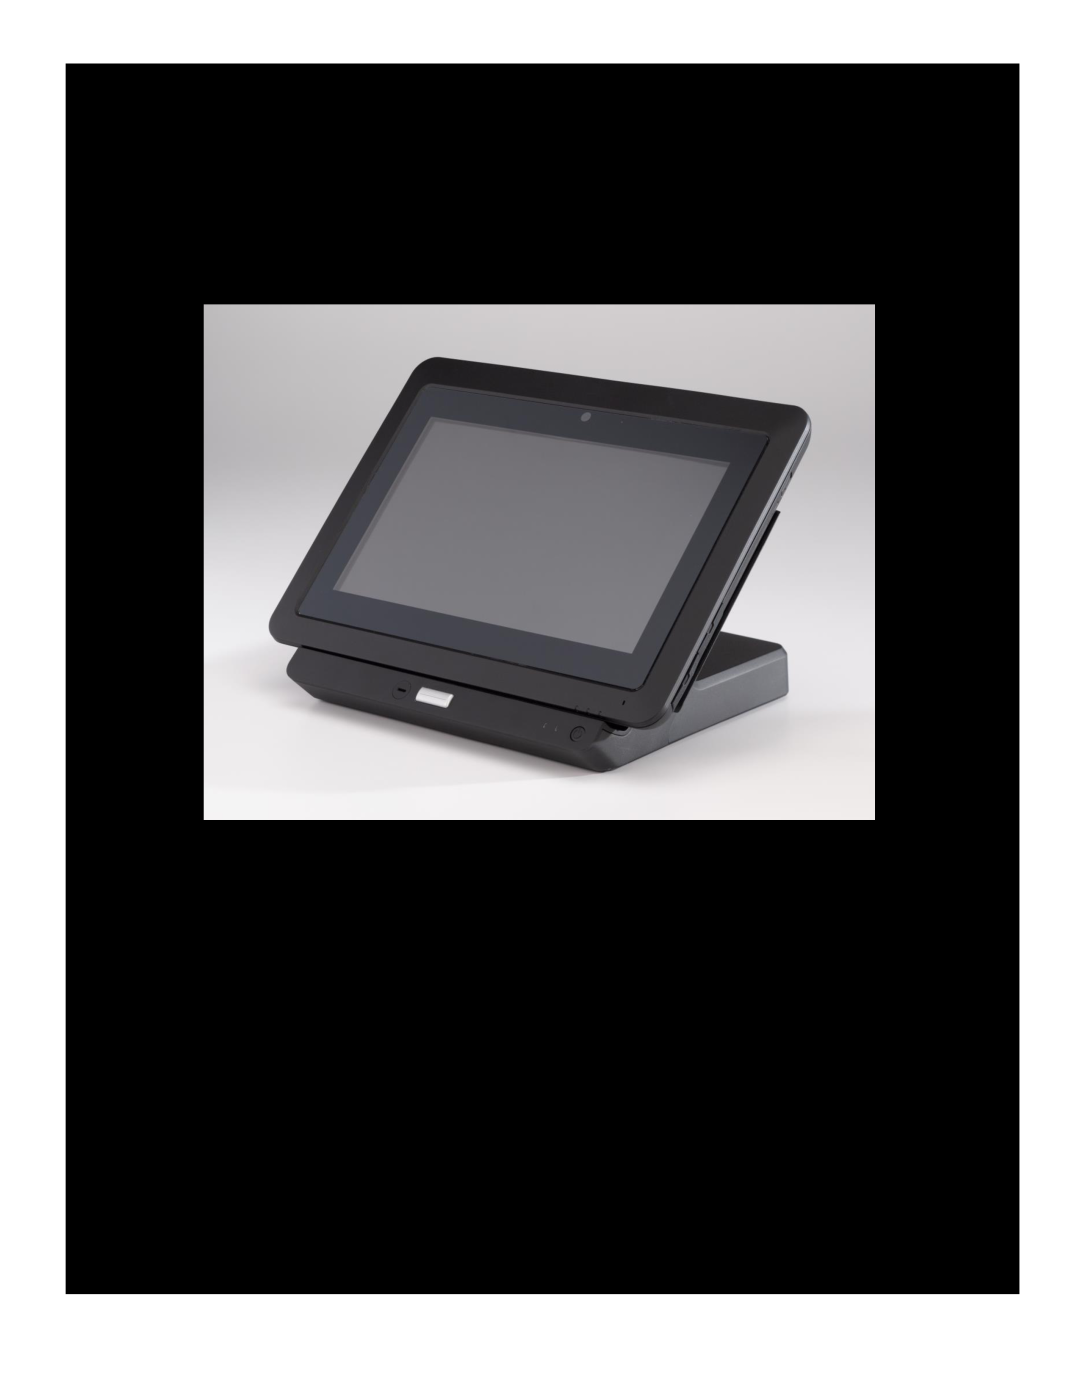 Elo TouchSystems ES601068 Rev A manual Elo Tablet, Elo Touch Solutions, API Document 